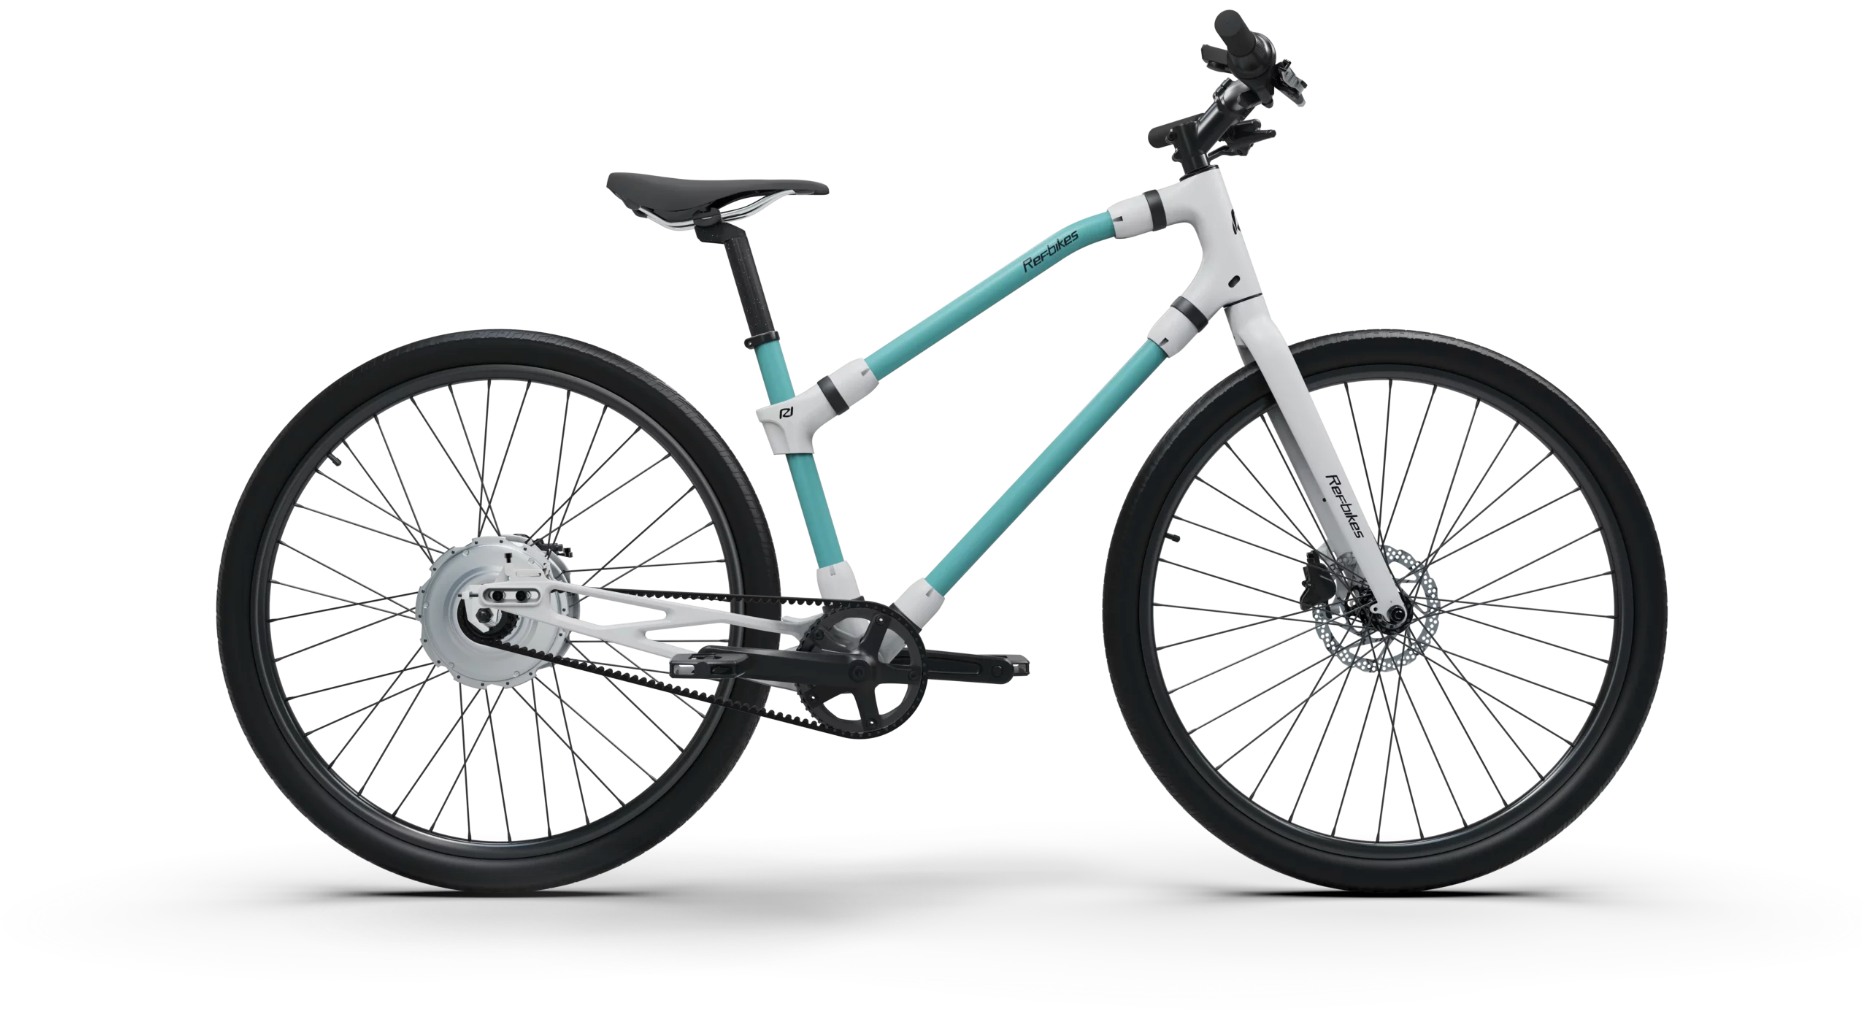 Two-tone Essential Boost bike with cyan and white color scheme.